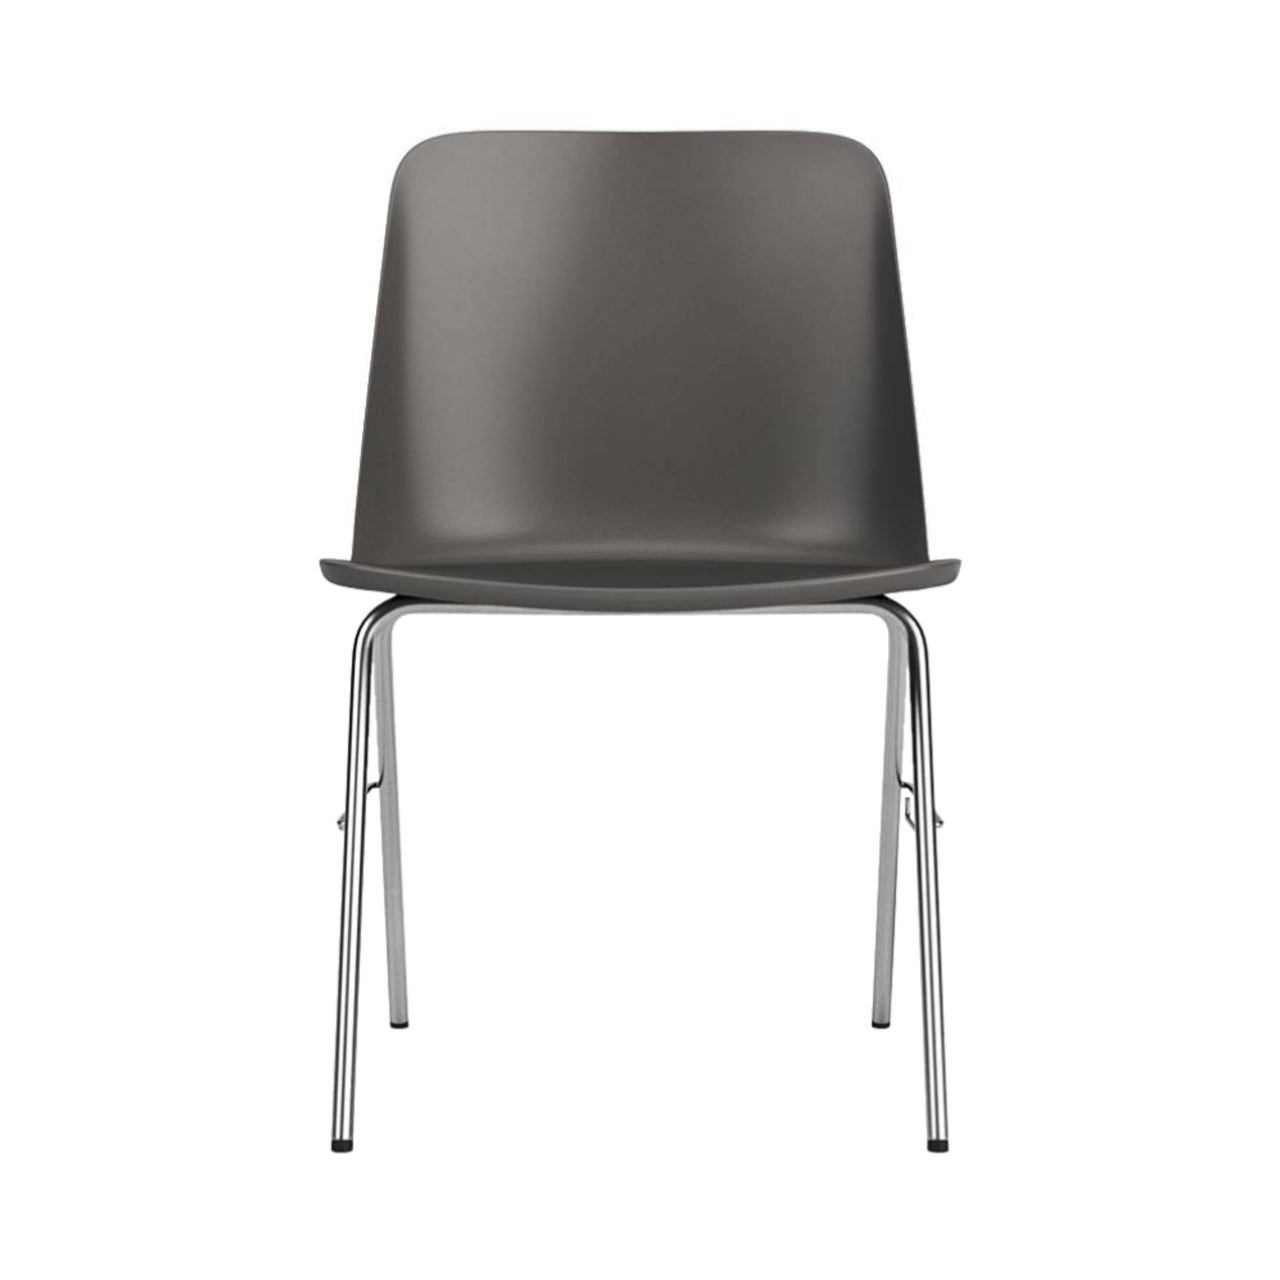 Rely Chair HW27: Stone Grey